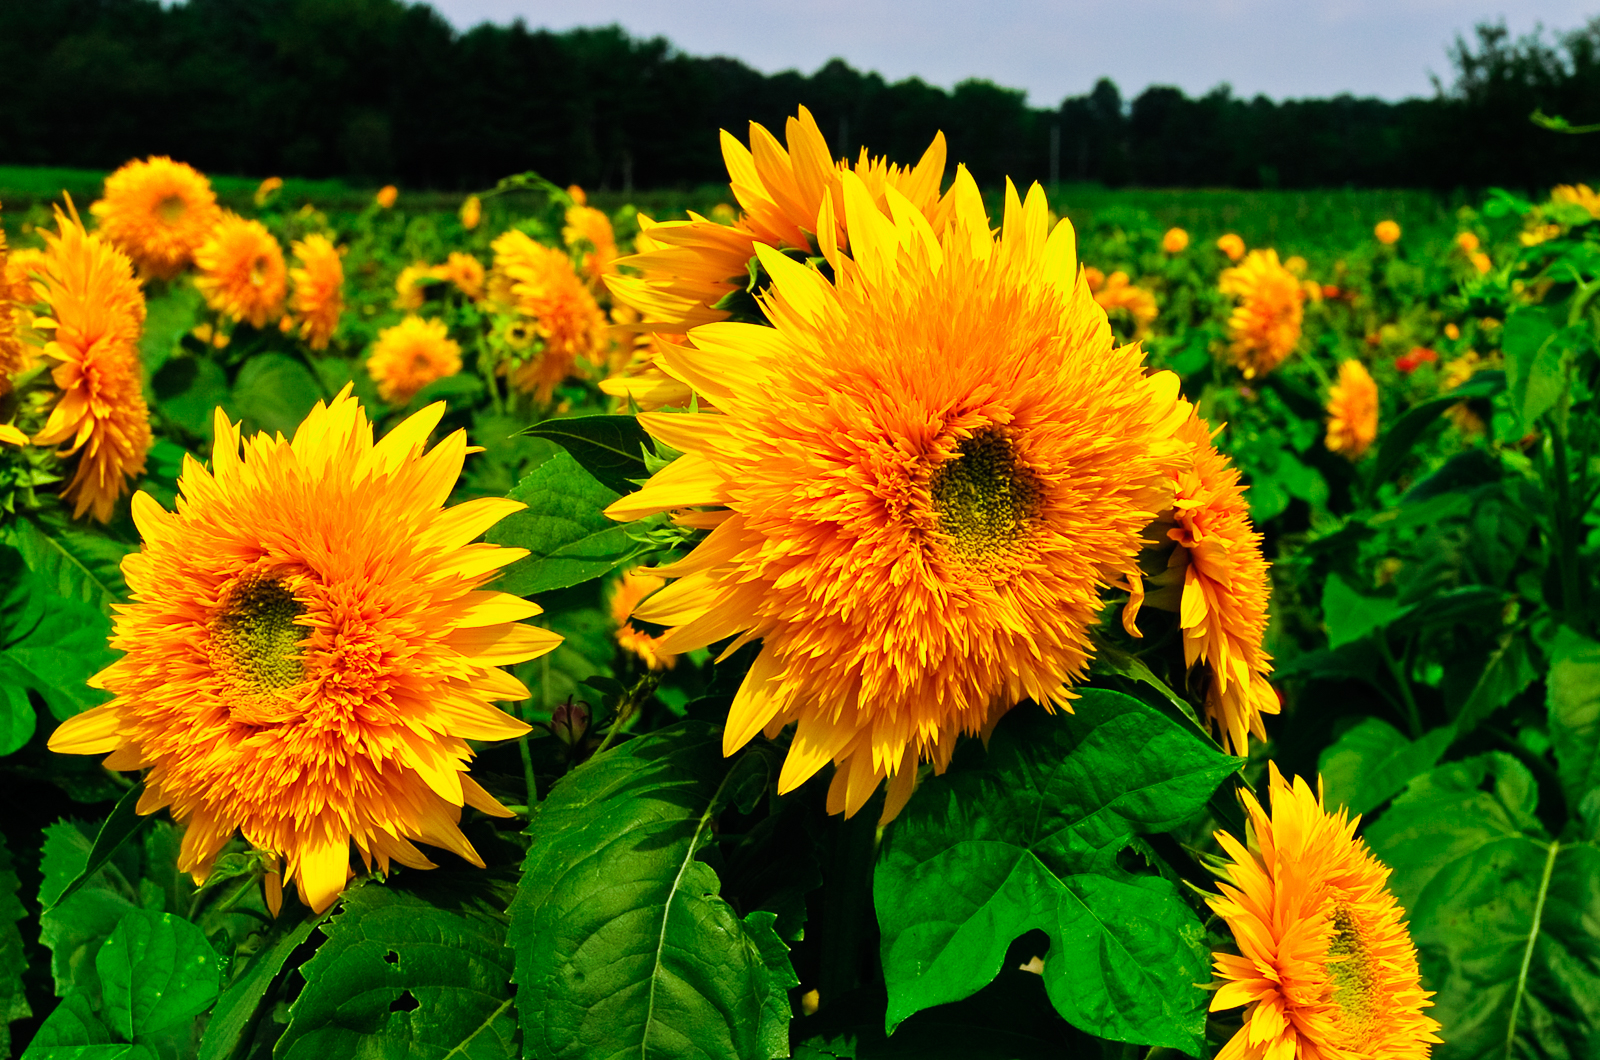 Photo of a fuzzy sunflowers to make you happy.